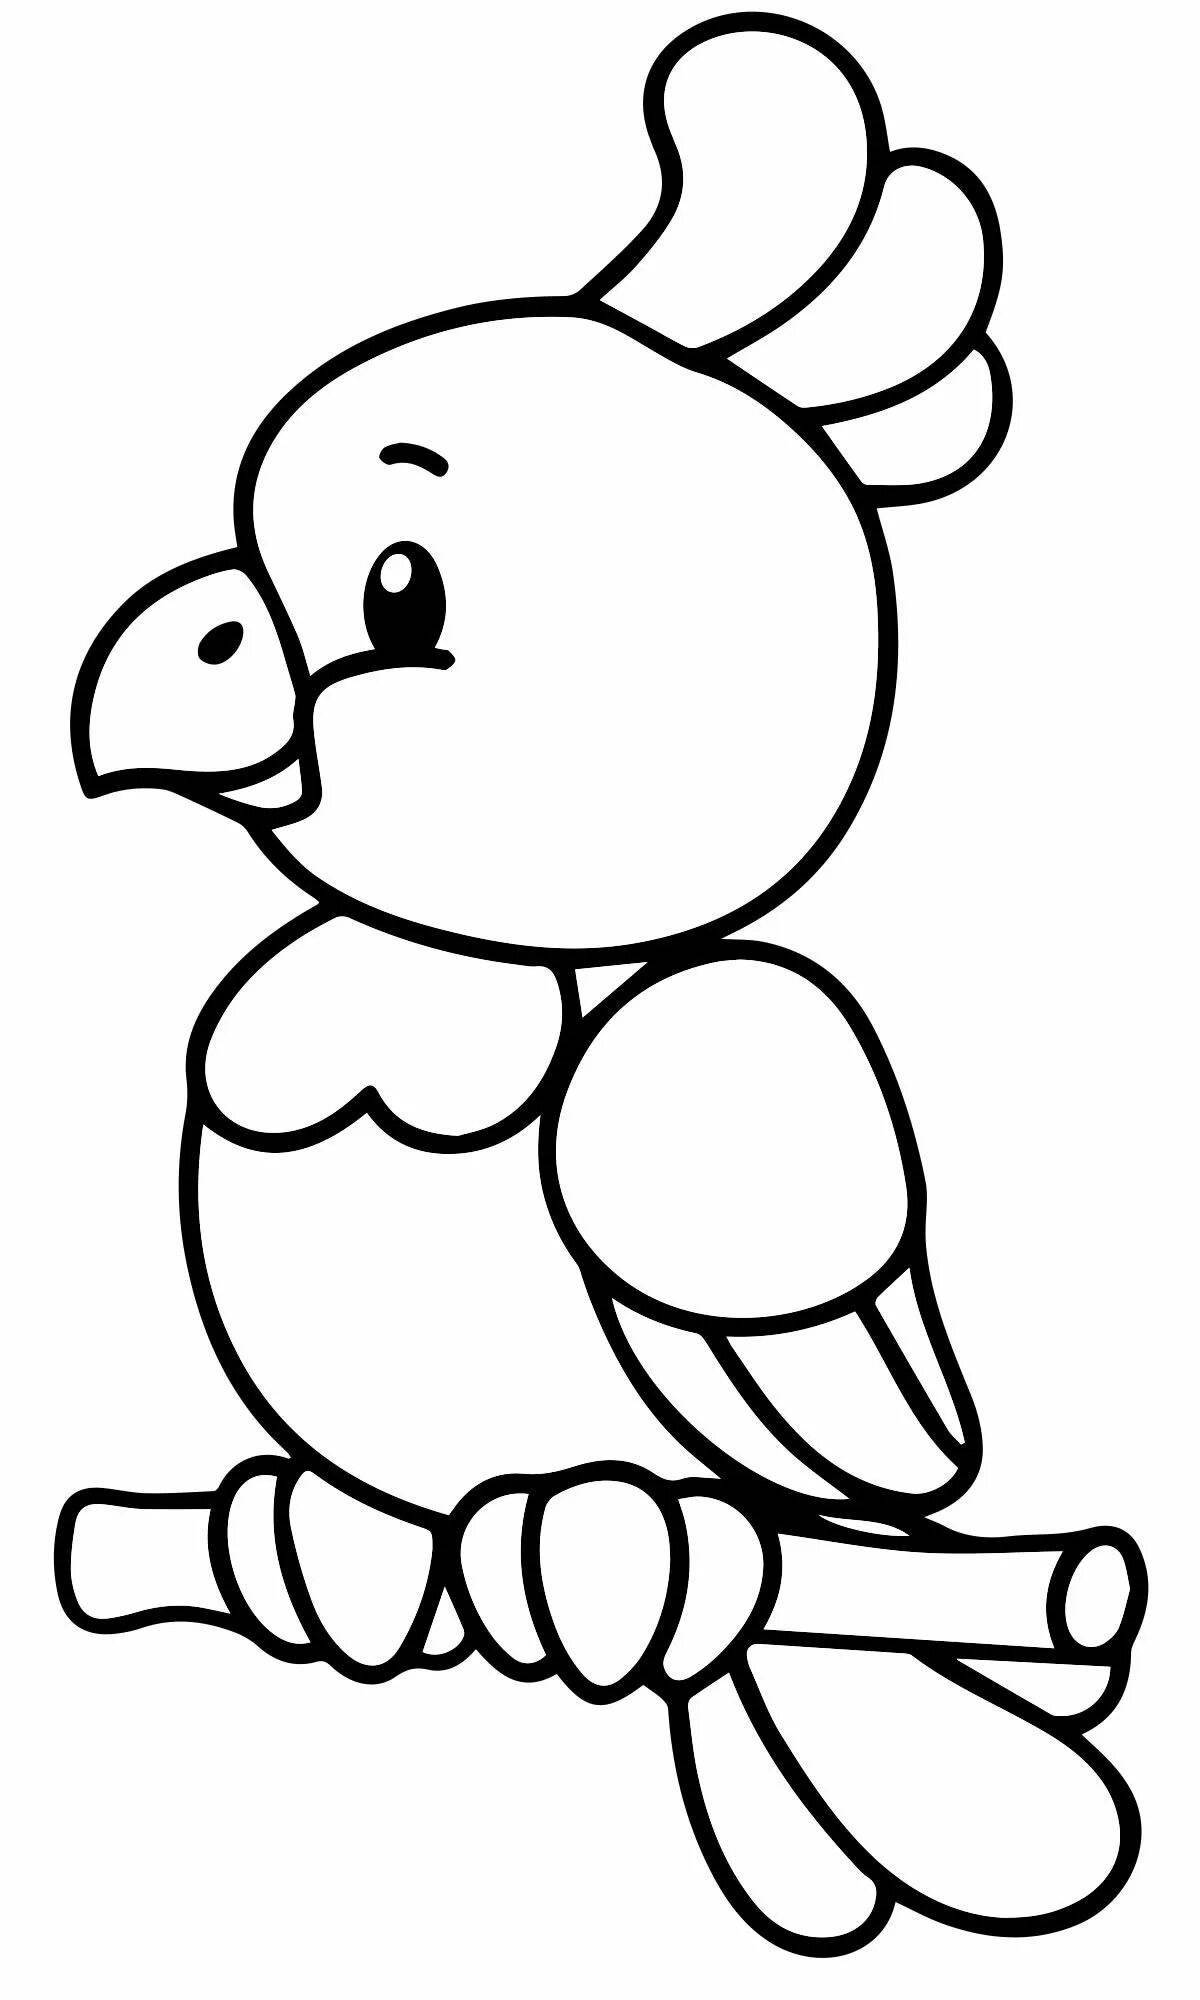 Adorable bird coloring pages for 2-3 year olds